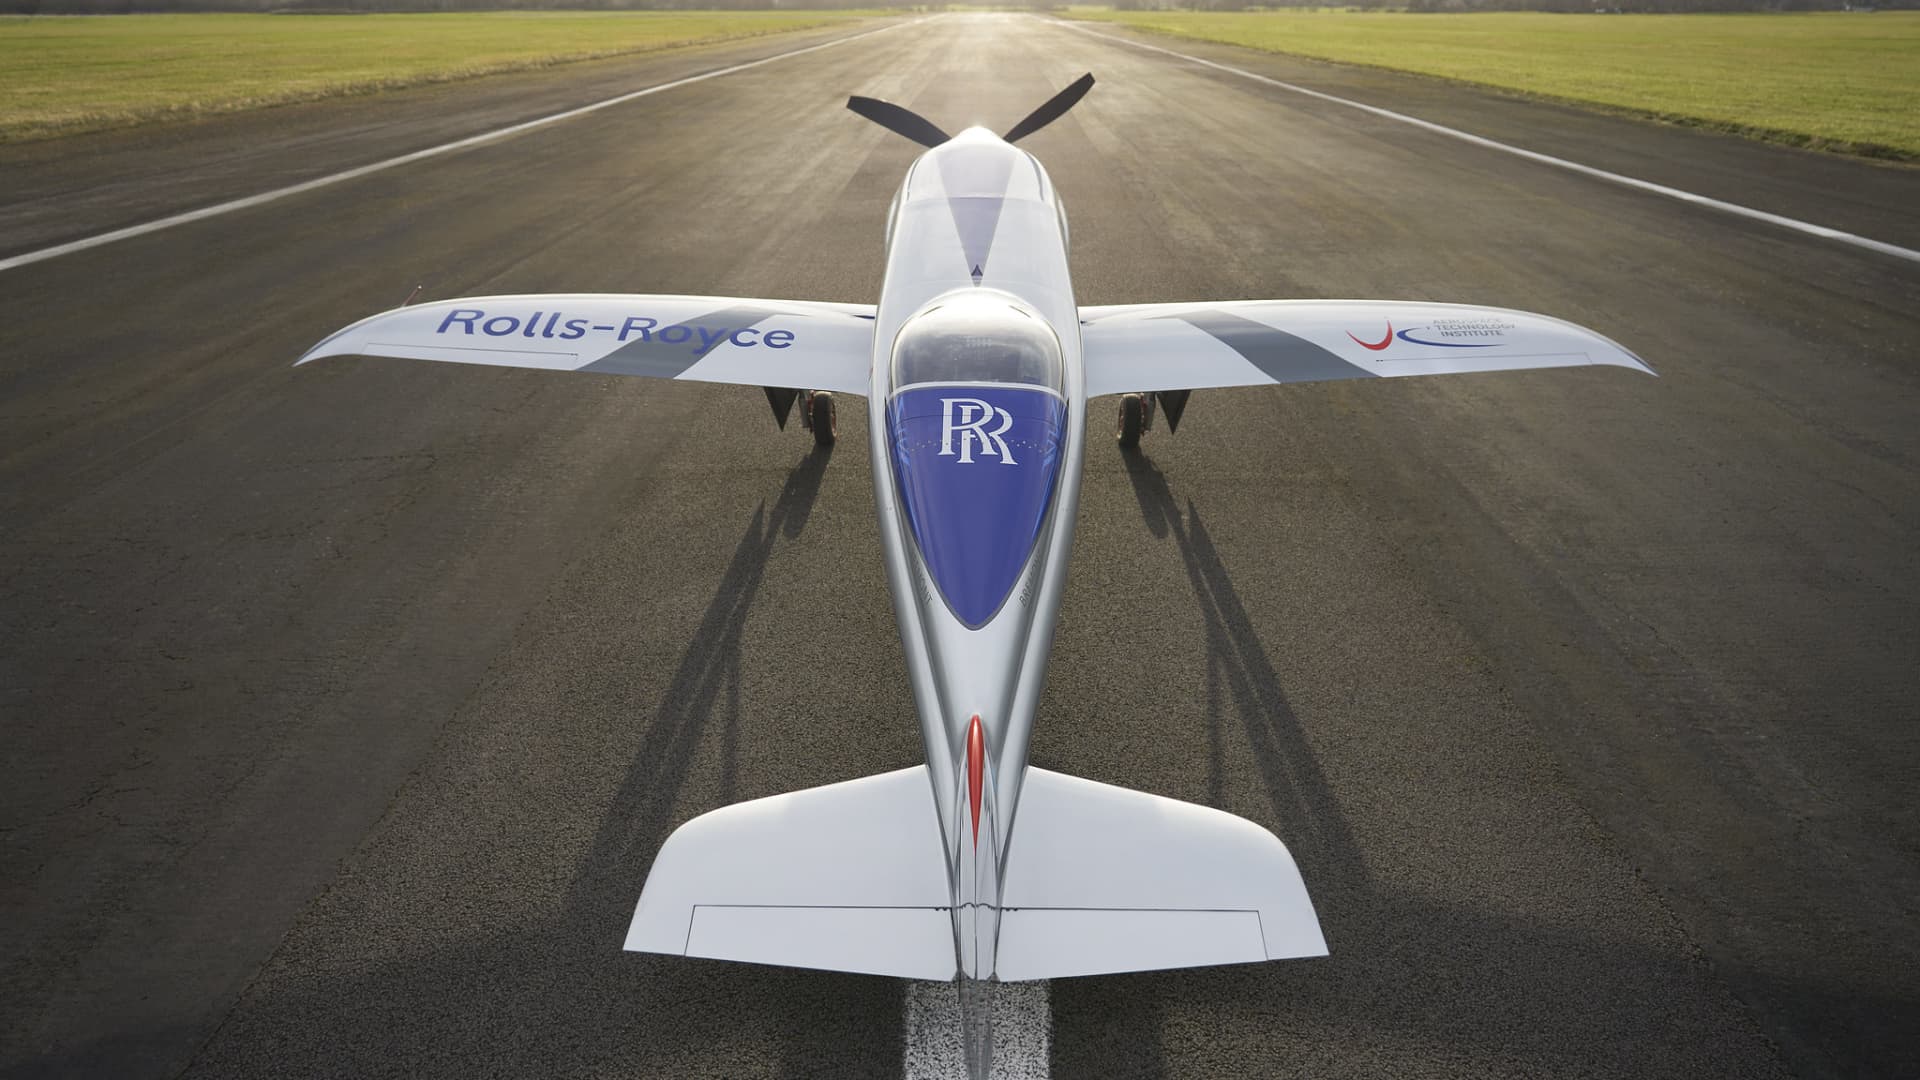 Rolls-Royce's all-electric Spirit of Innovation takes to the skies for the first time.